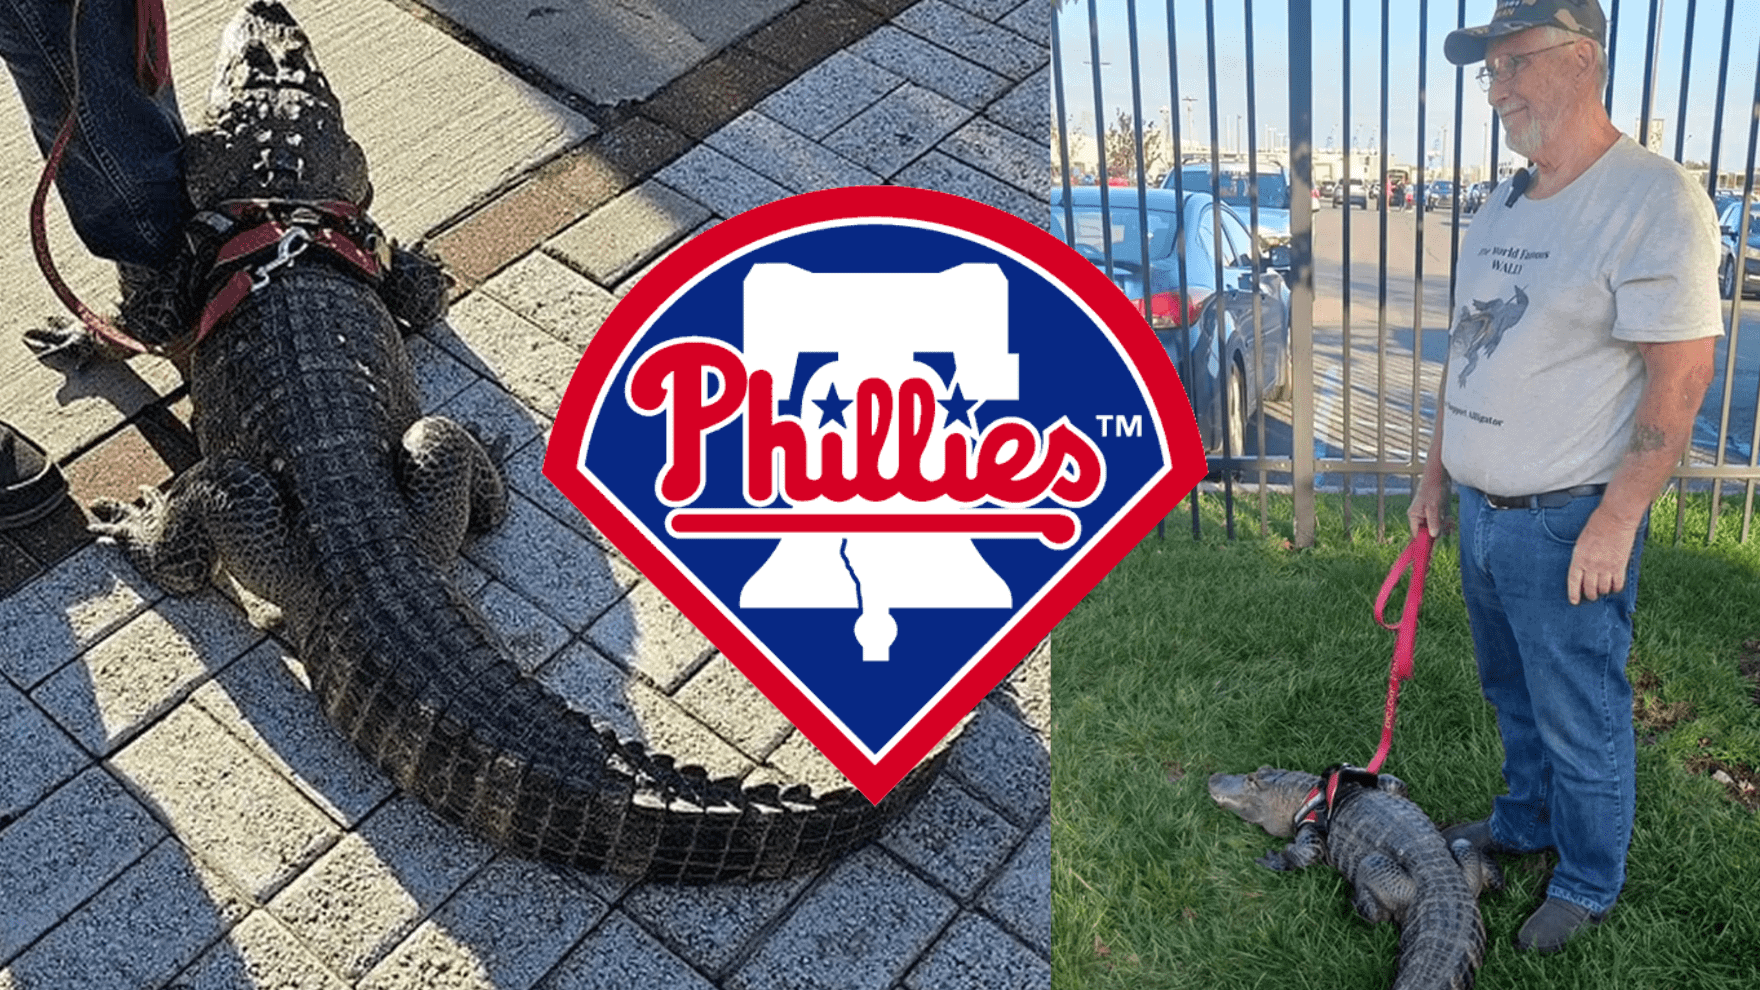 Emotional Support Alligator Denied Entry to Phillies Game